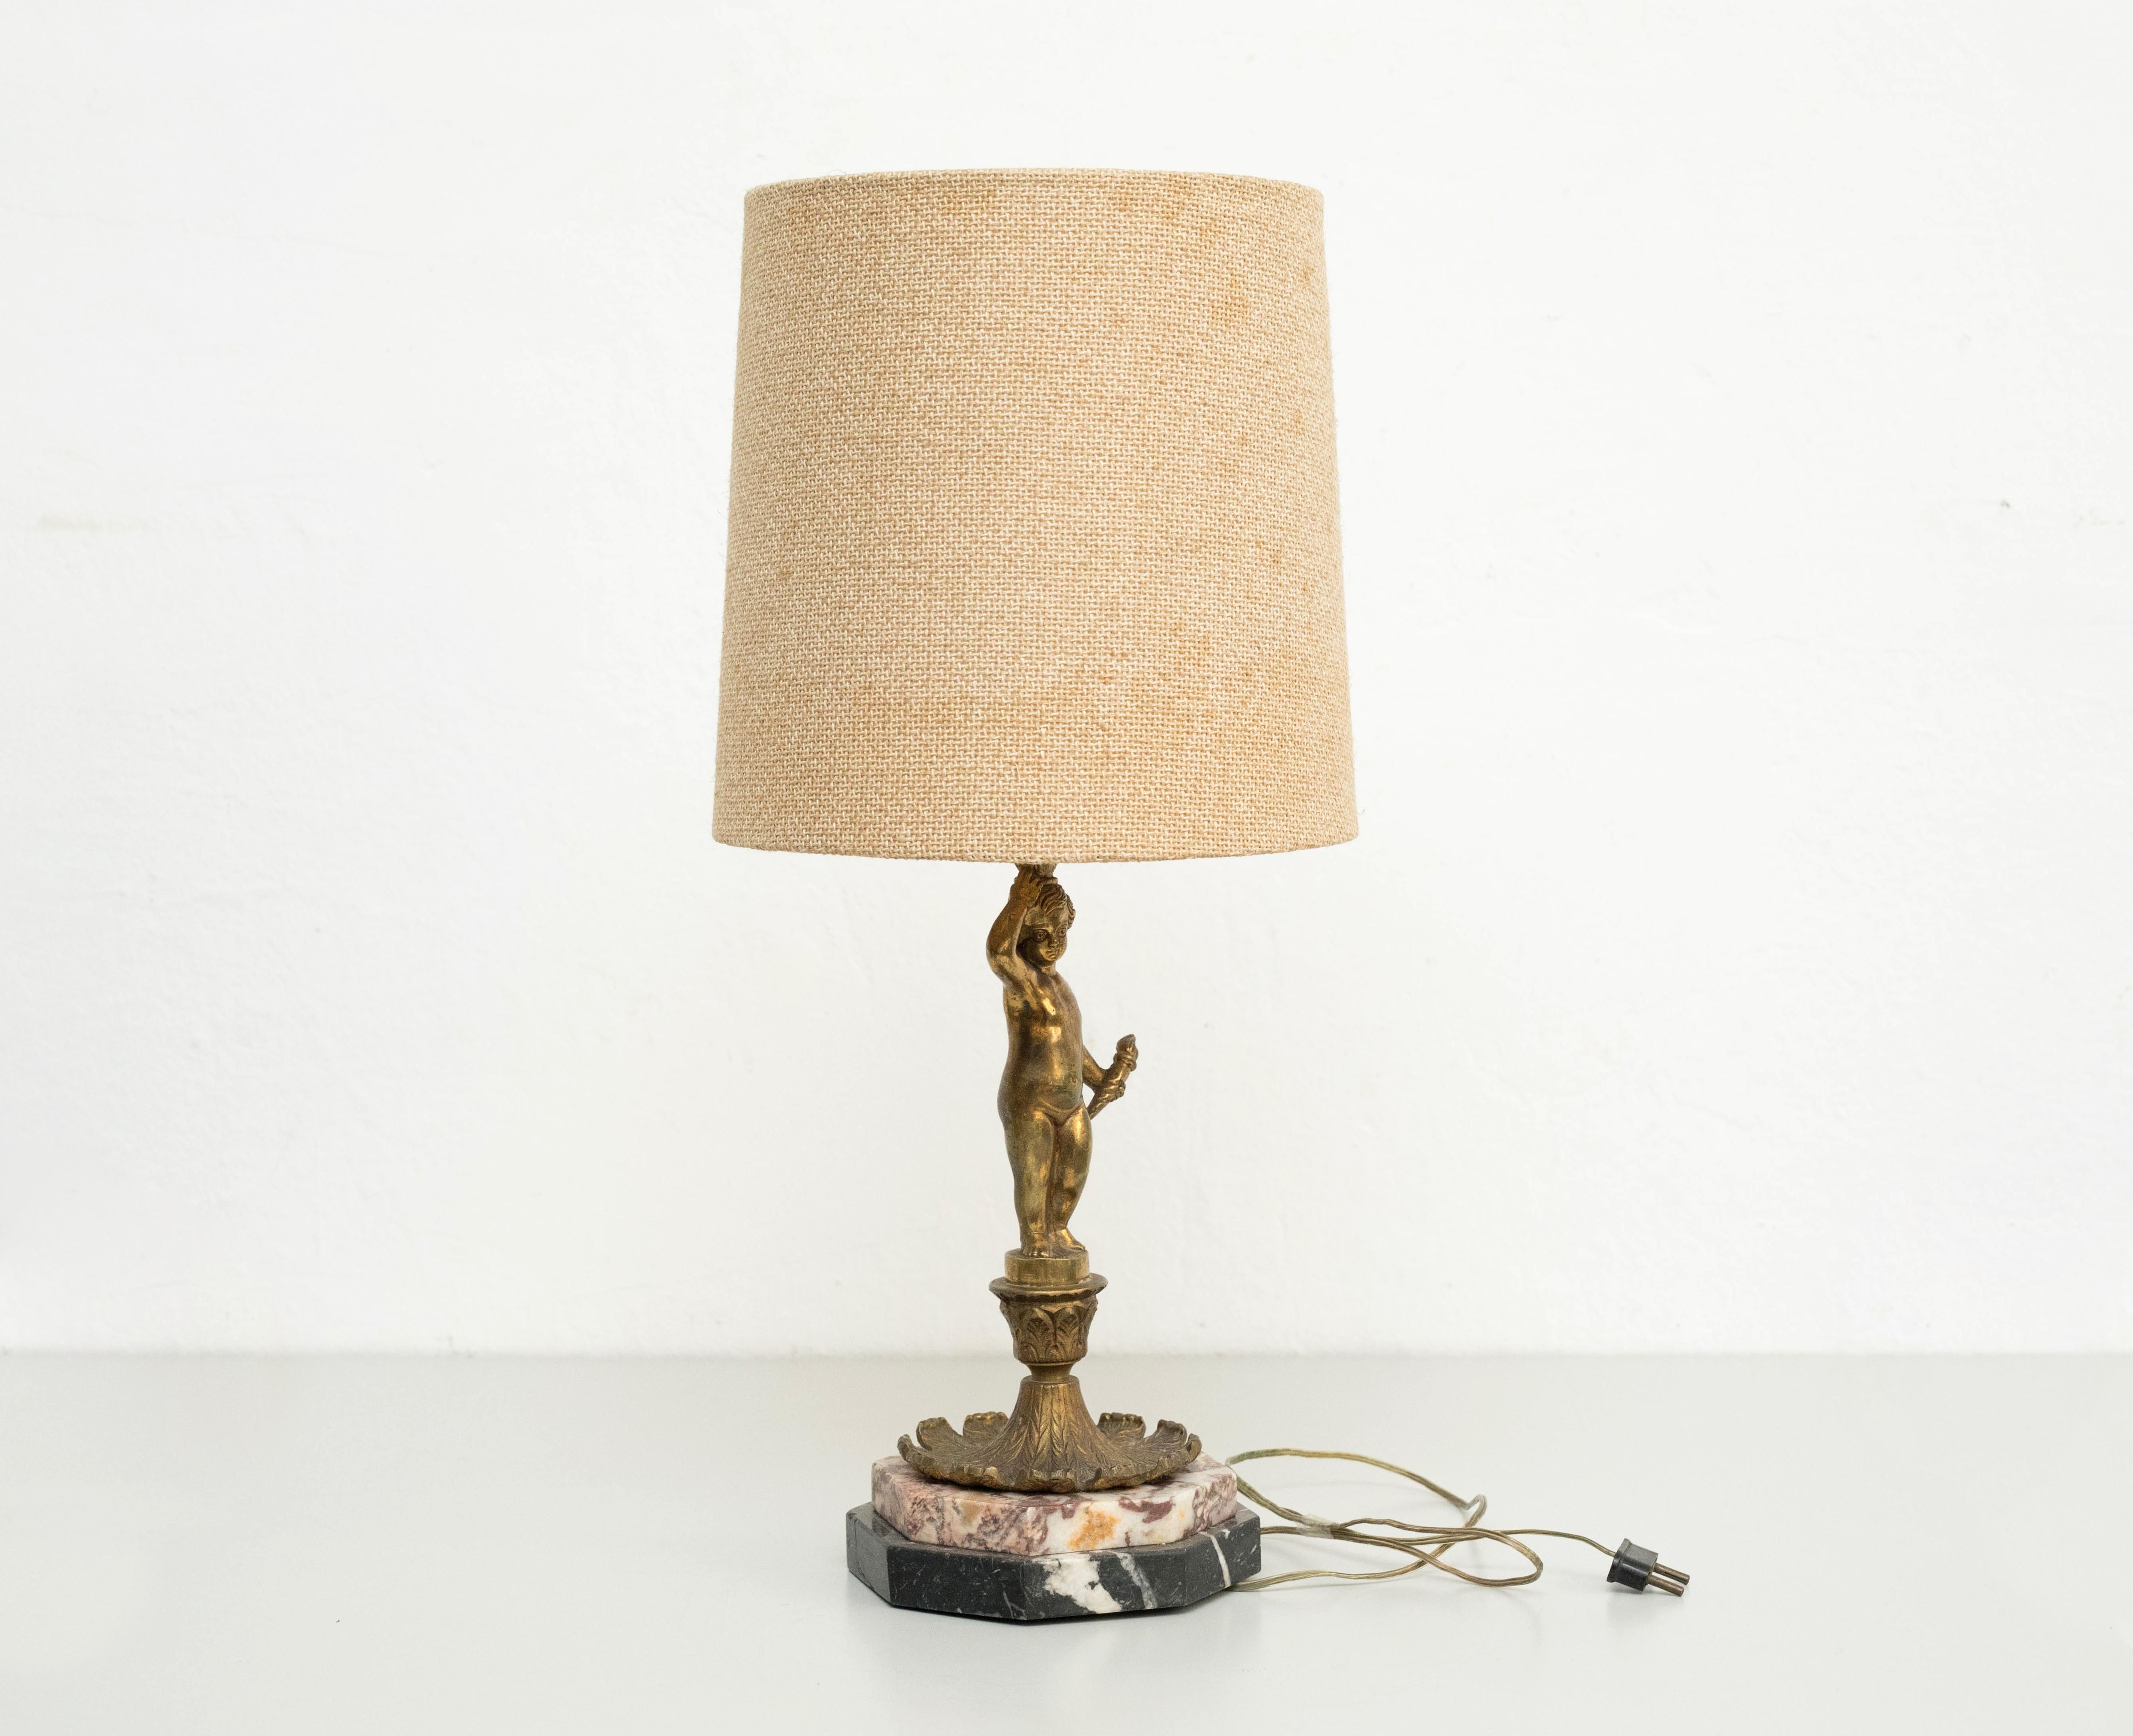 Table lamp, metal and marble, Circa 1950.

In original condition, wear consistent with age and use, preserving a beautiful patina.

Materials:
Metal and Marble

Dimensions:
ø 24 cm x H 55.5 cm.

Elecrtification has not been tested. Wired for Europe.